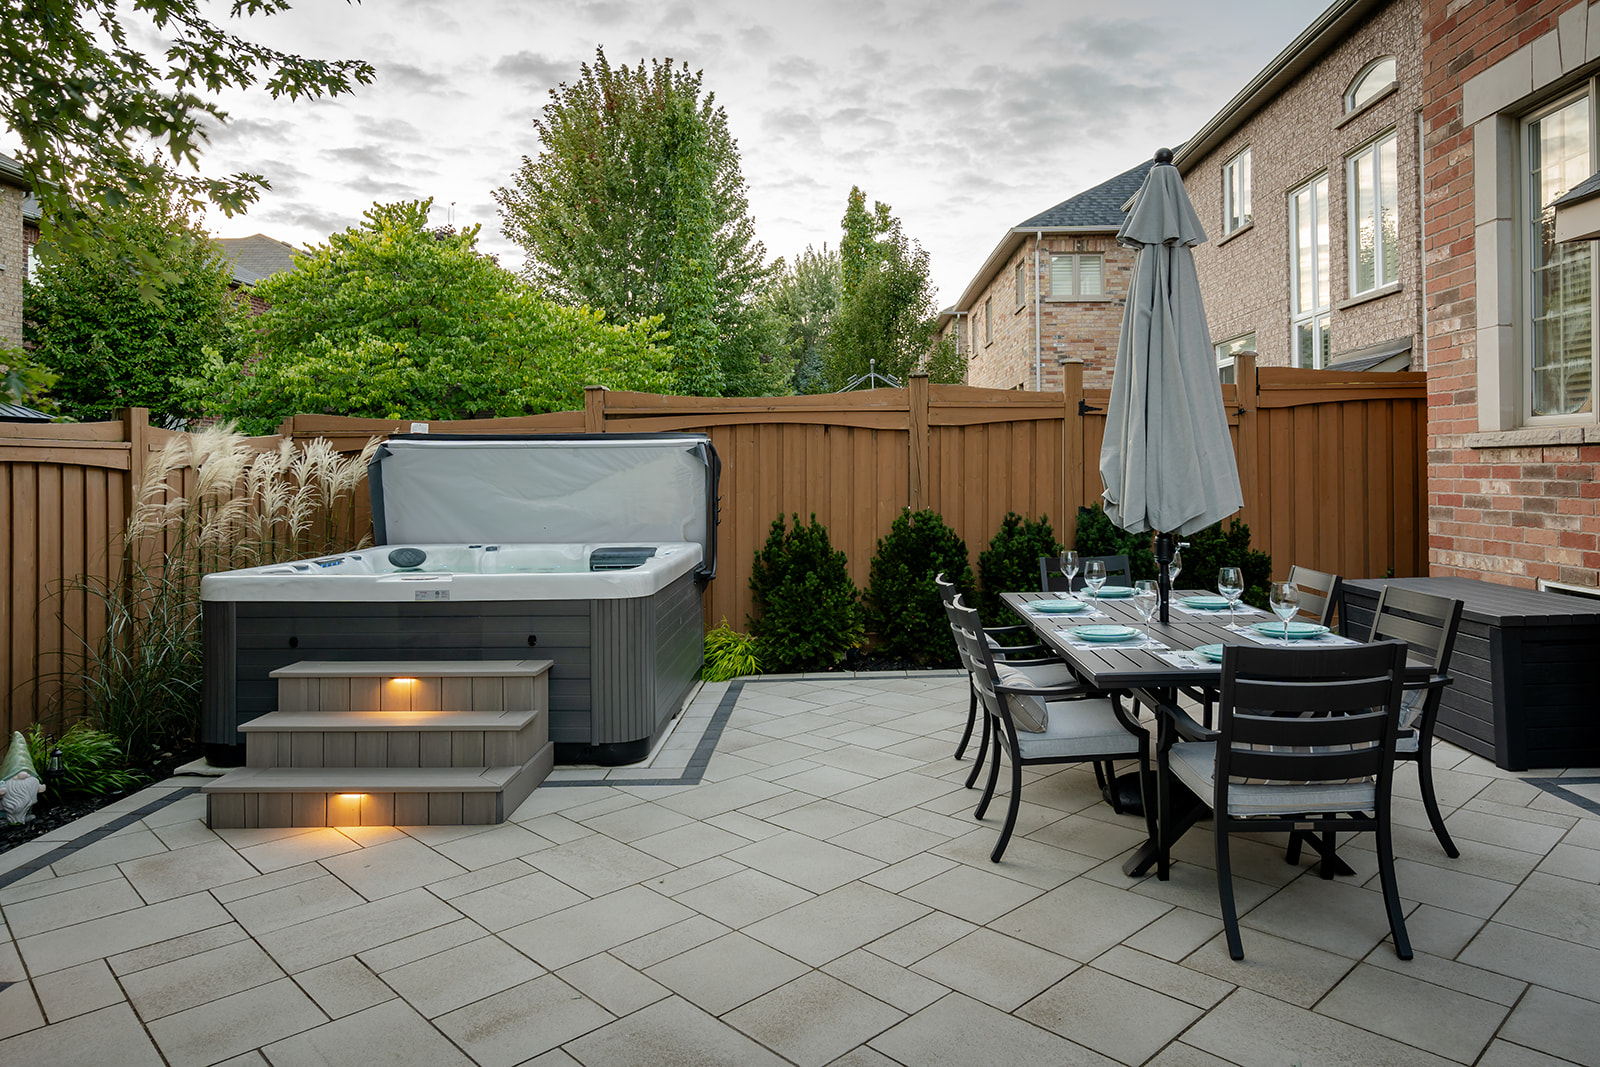 An above-ground jacuzzi with steps and an outdoor seating area to the side.